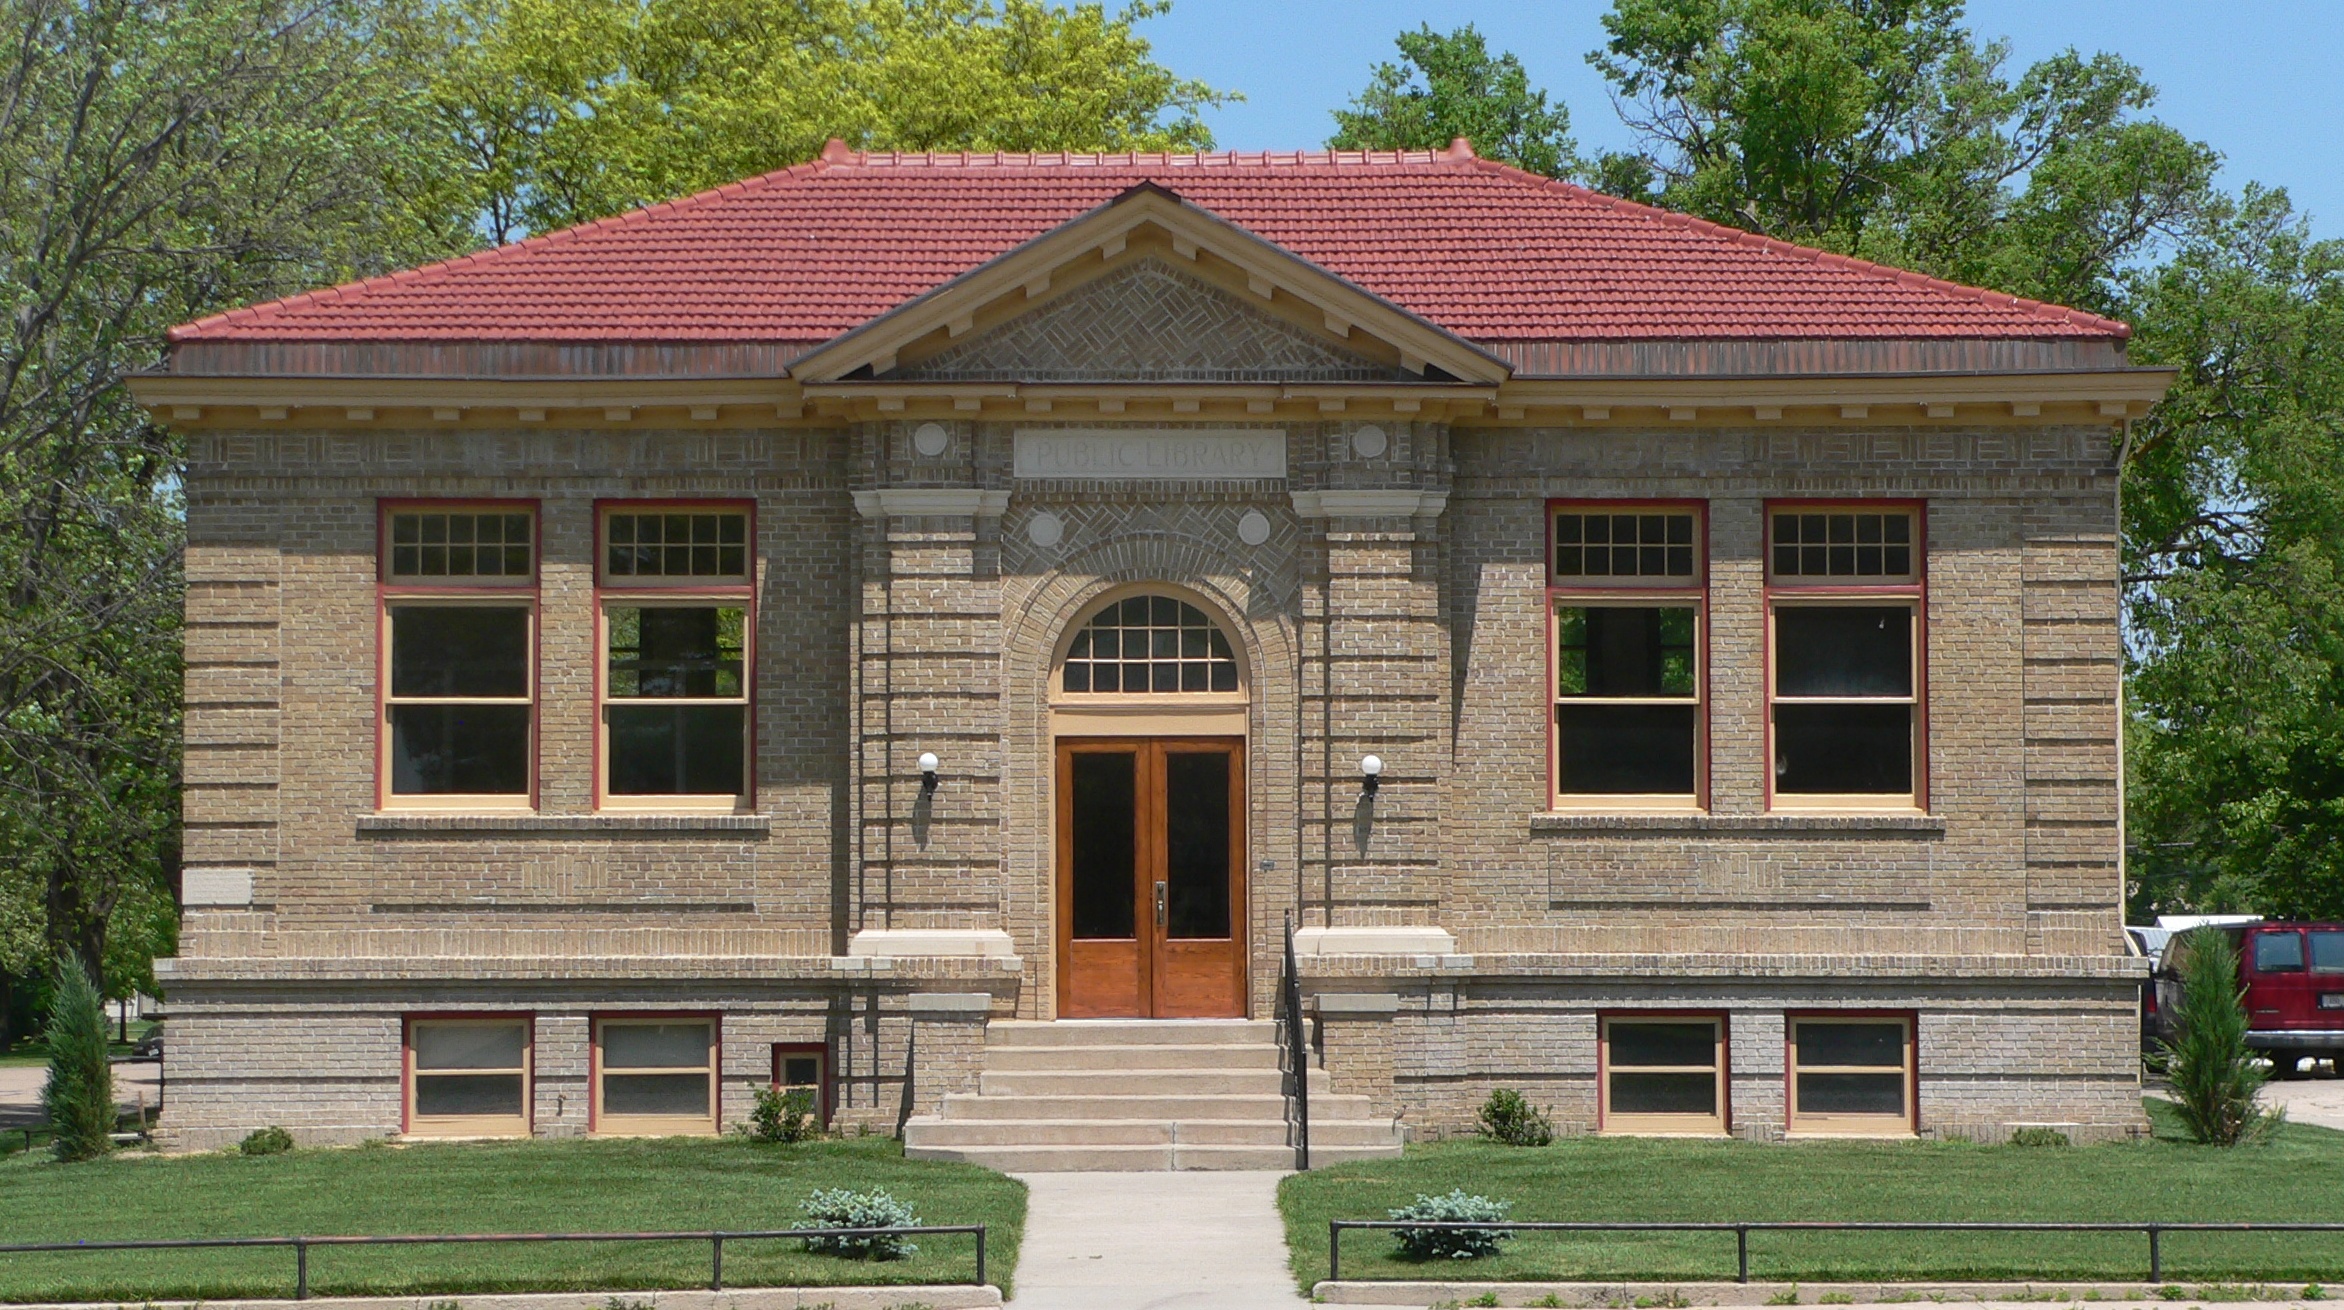 Loup City Carnegie Library from S